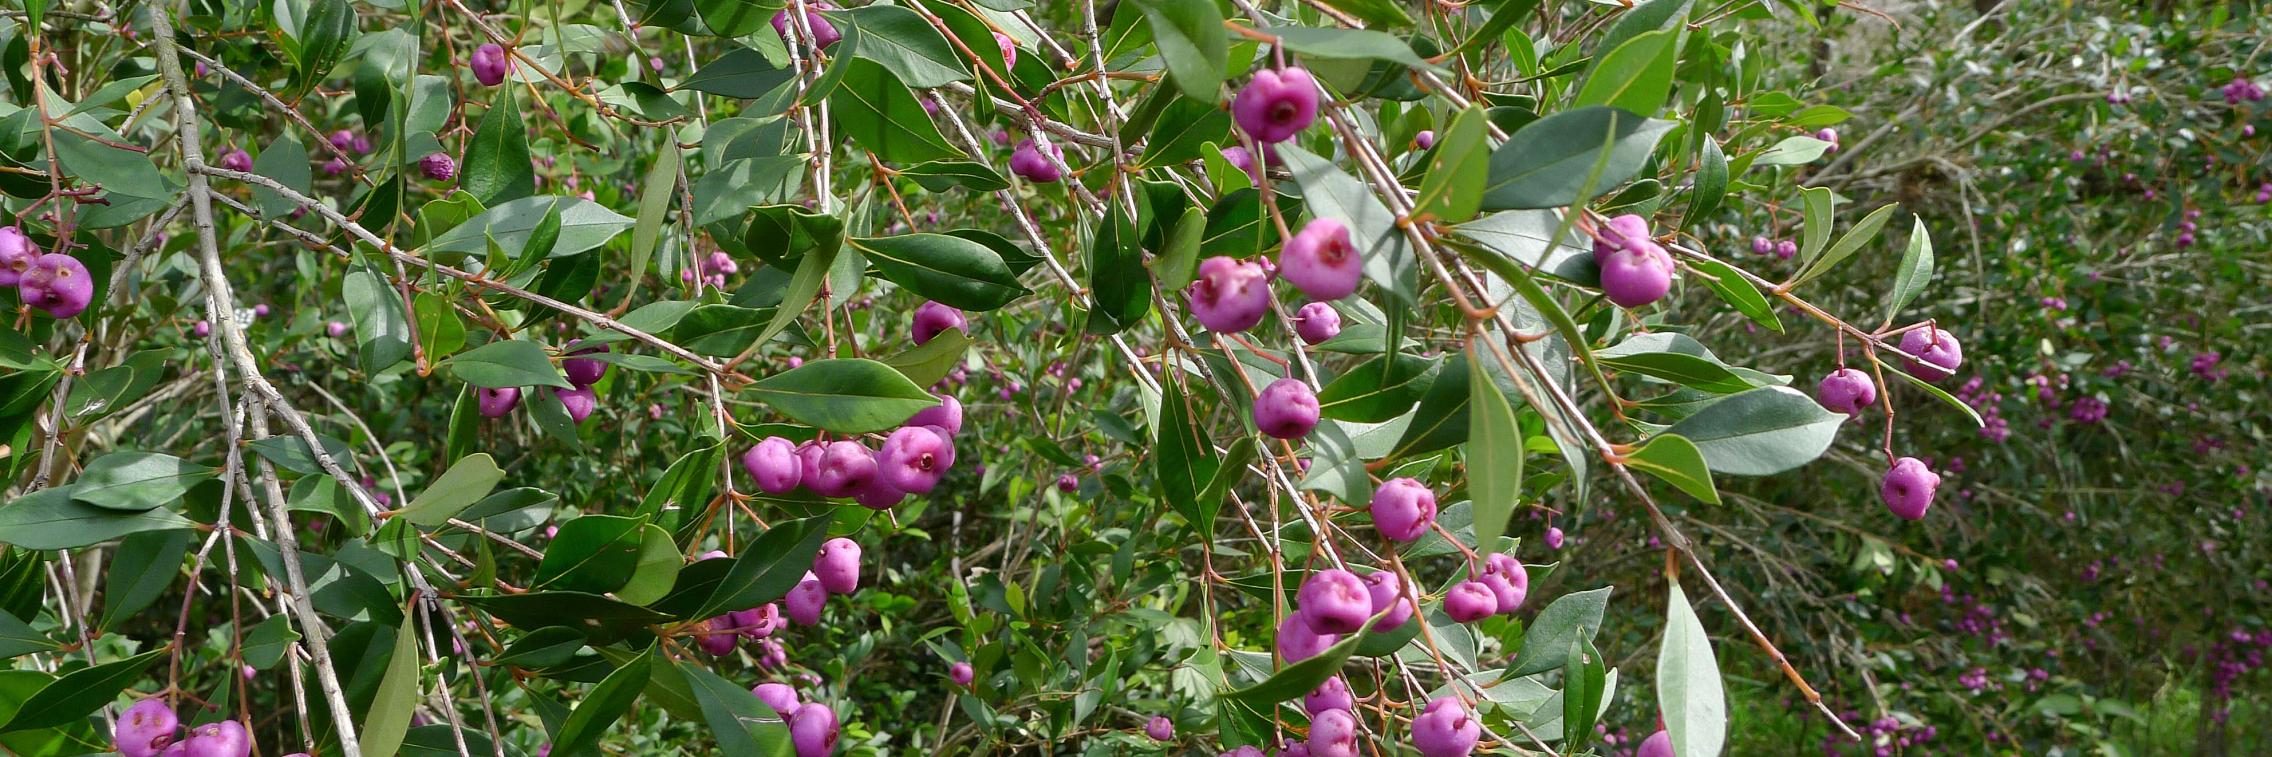 Lilly Pilly or Syzygium smithii growing in forest at Nymboida National Park